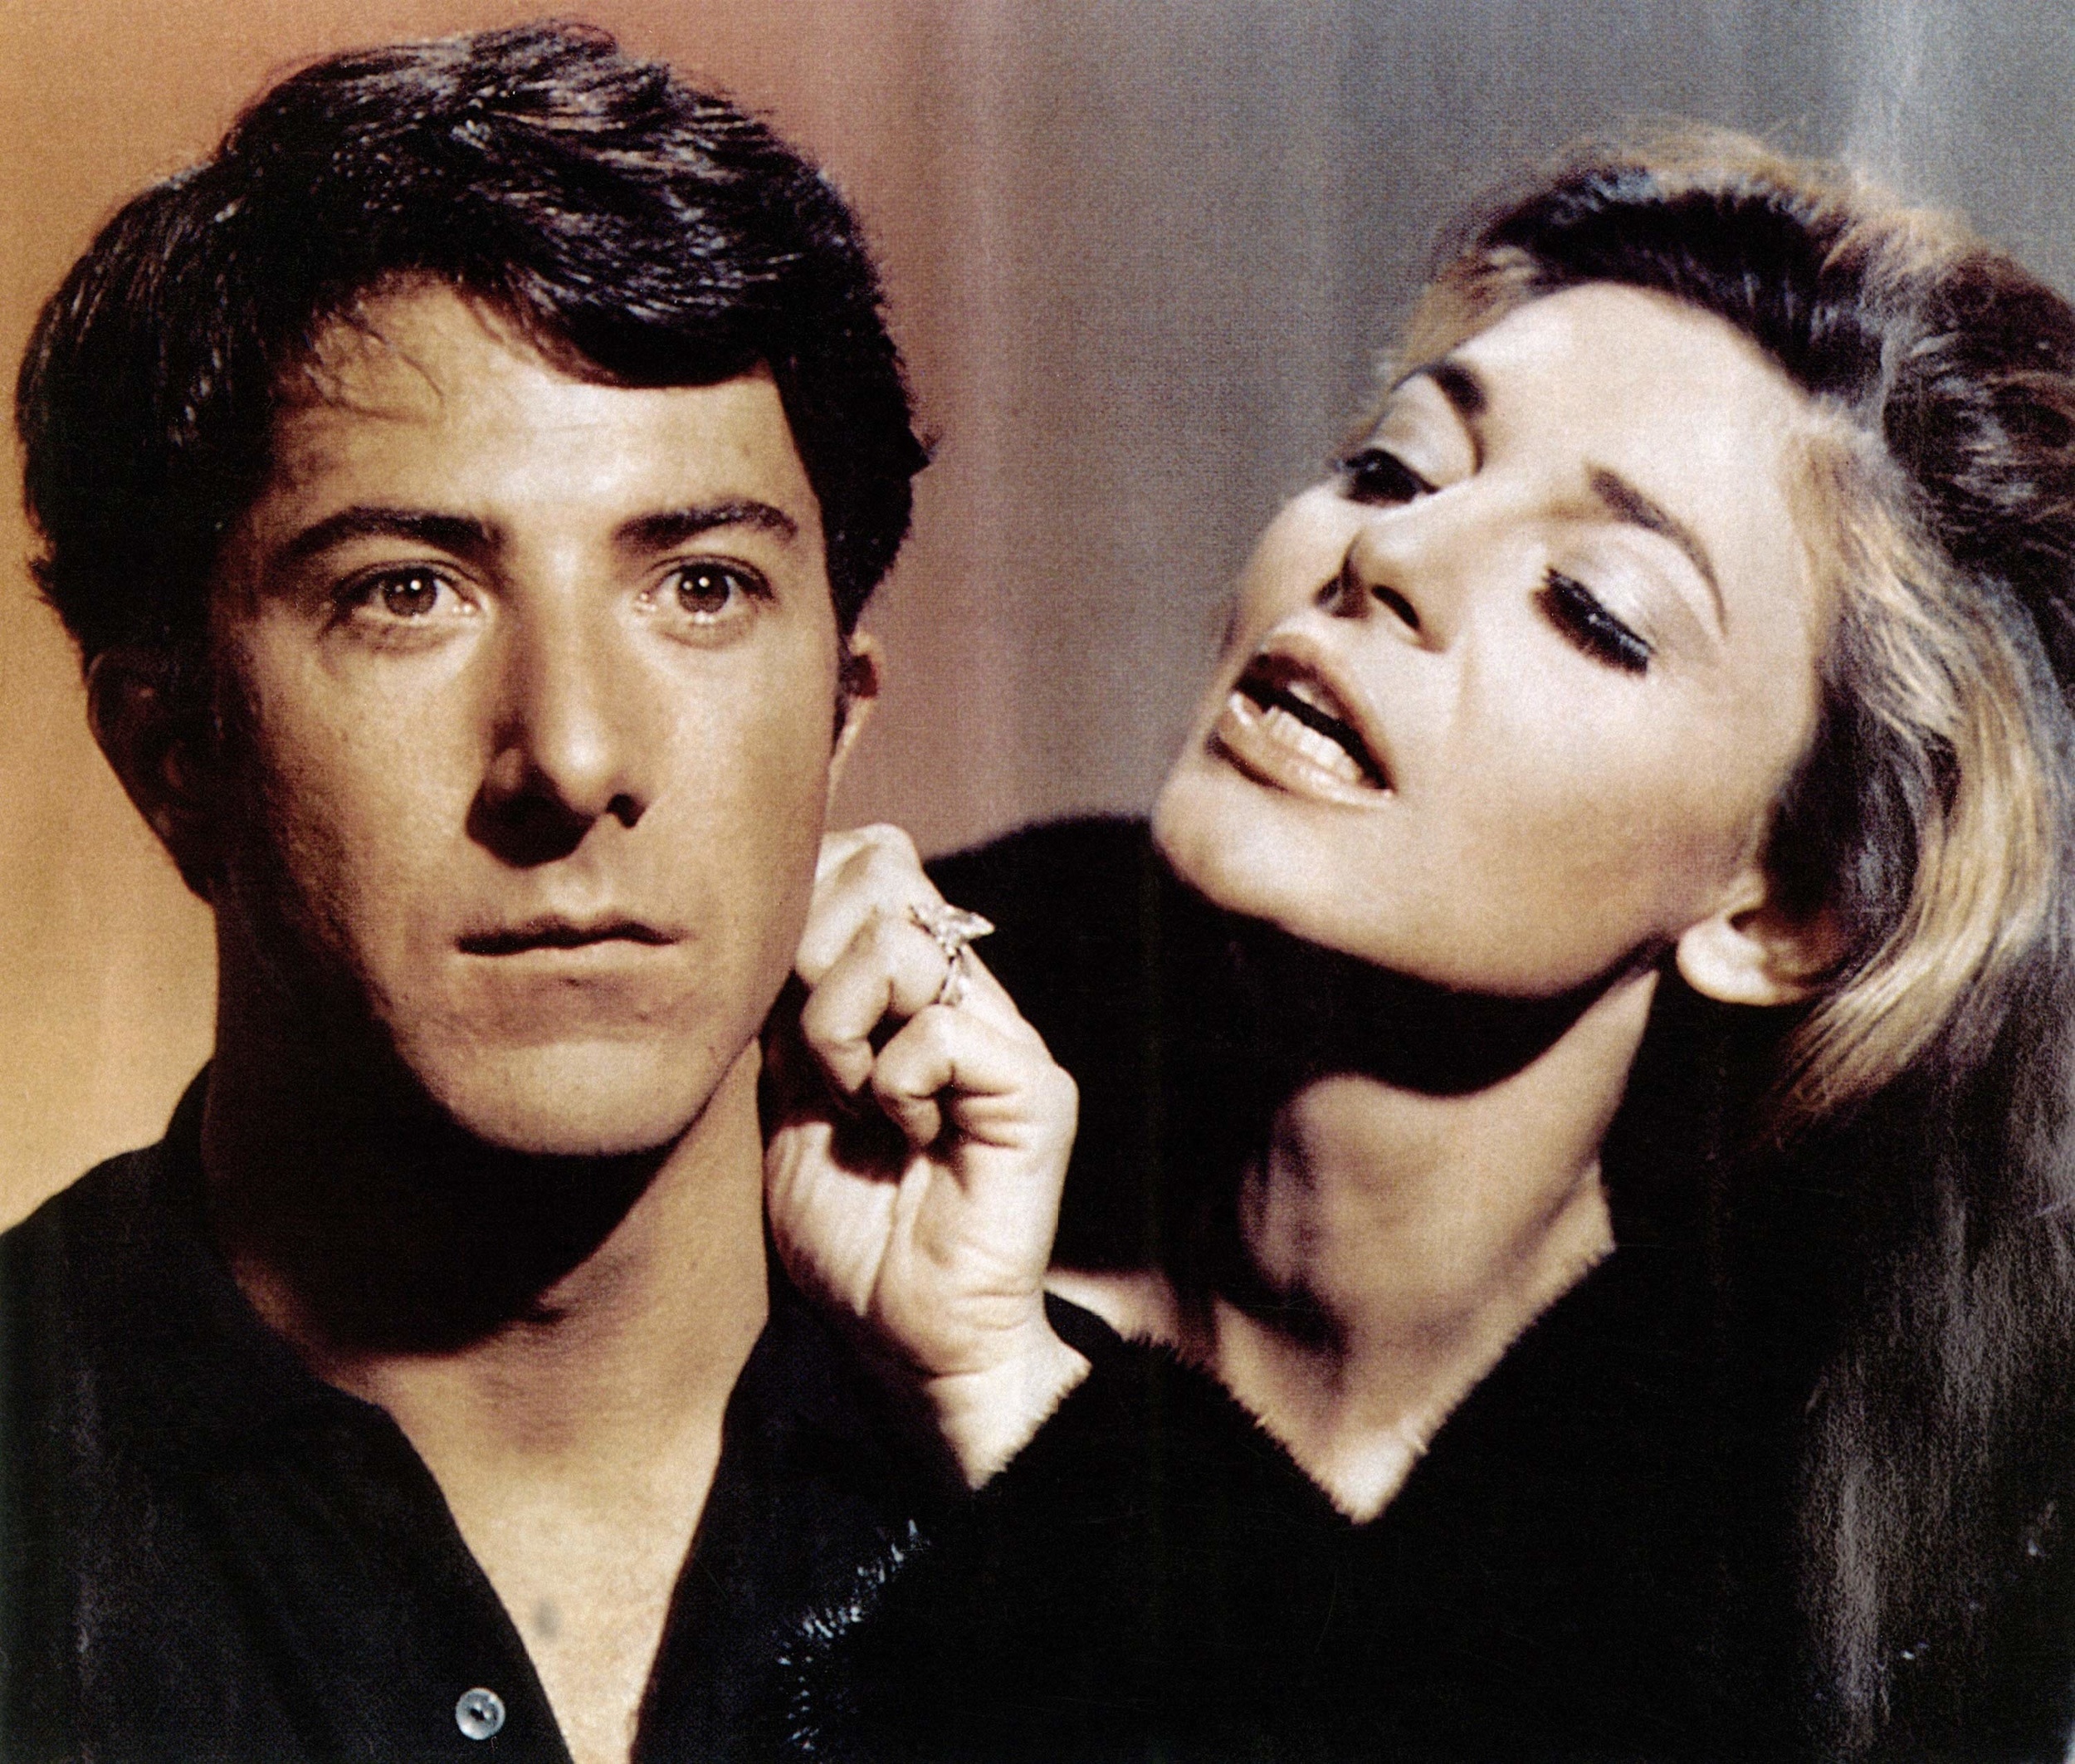 <p>A <a href="https://www.youtube.com/watch?v=hsdvhJTqLak">true classic</a> by the late legendary director Mike Nichols. Benjamin (Dustin Hoffman), directionless in his early 20s, is seduced by an older woman — the famed Mrs. Robinson (Anne Bancroft). He also happens to be in love with her daughter (Katharine Ross). It's 1960s camp at its finest and filled with all sorts of symbolism. Not to mention, the Simon & Garfunkel-fueled soundtrack is quite appropriate. </p><p><a href='https://www.msn.com/en-us/community/channel/vid-cj9pqbr0vn9in2b6ddcd8sfgpfq6x6utp44fssrv6mc2gtybw0us'>Follow us on MSN to see more of our exclusive entertainment content.</a></p>